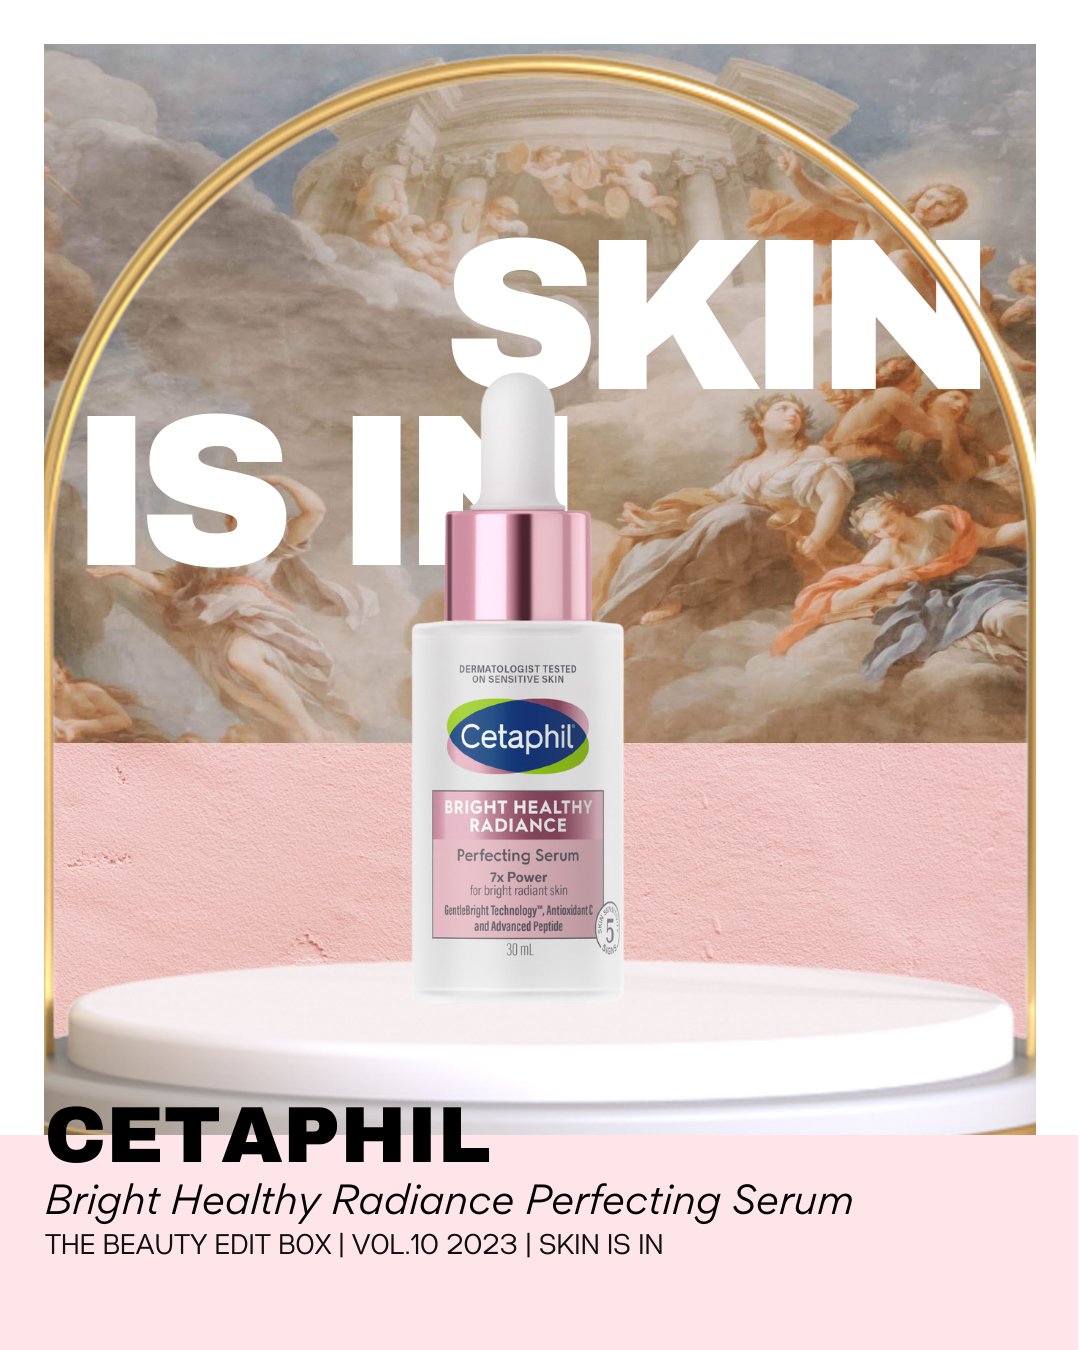 Inside The Beauty Edit Box Vol. 10: Cetaphil Bright Healthy Radiance